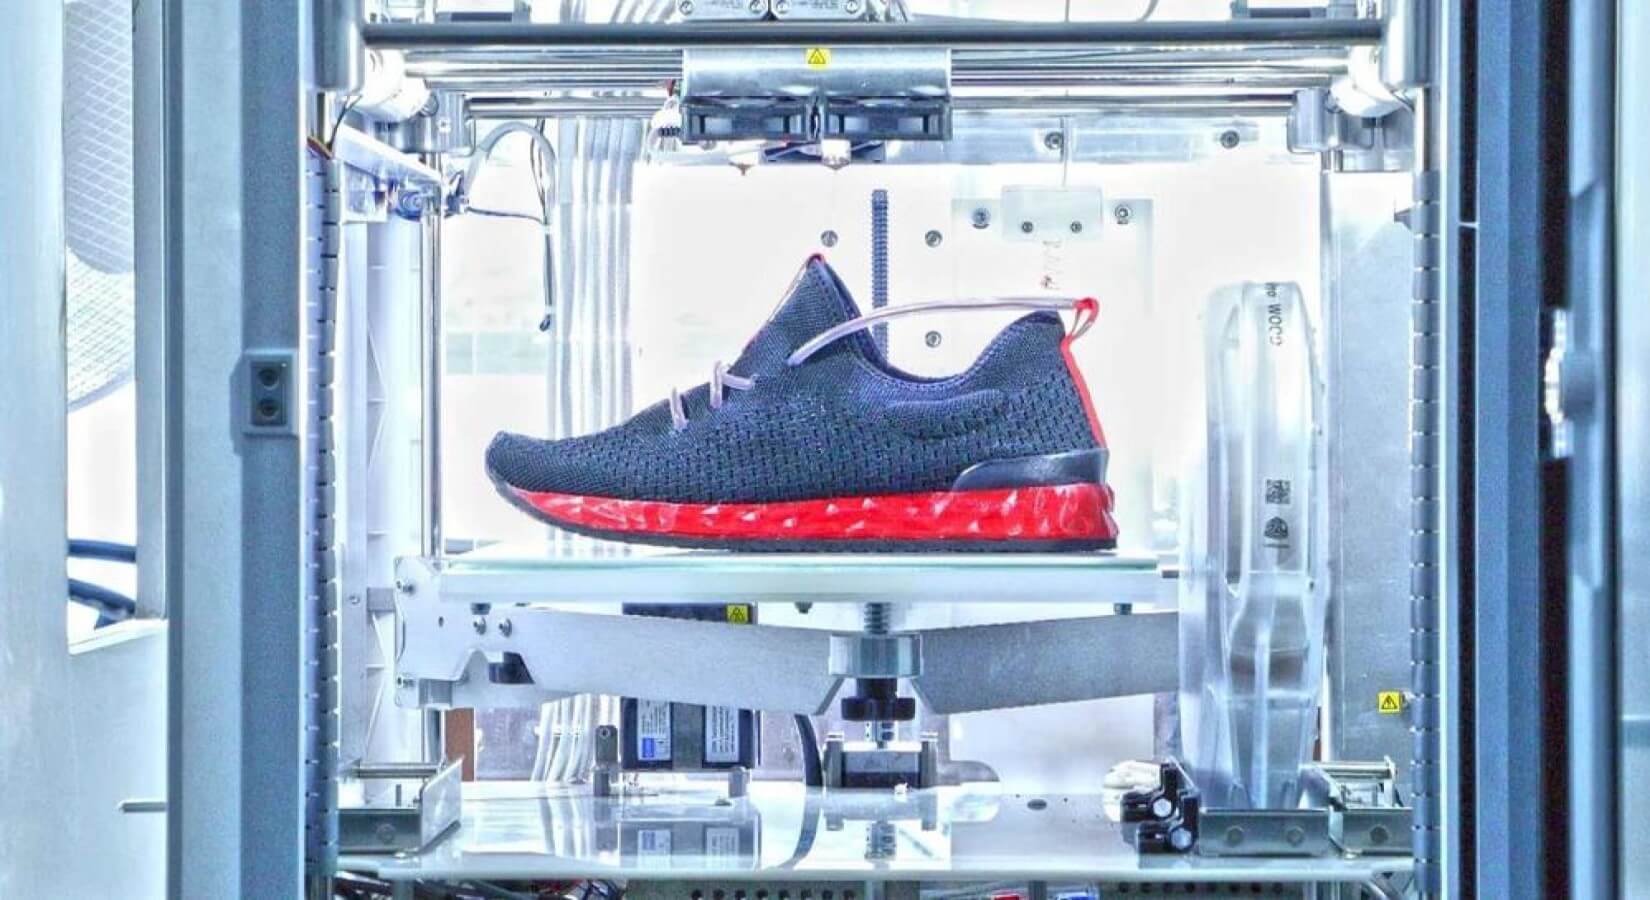 3D Printed Shoes in 2020: Big Brands Are on Board - PrinterMods UK Ltd